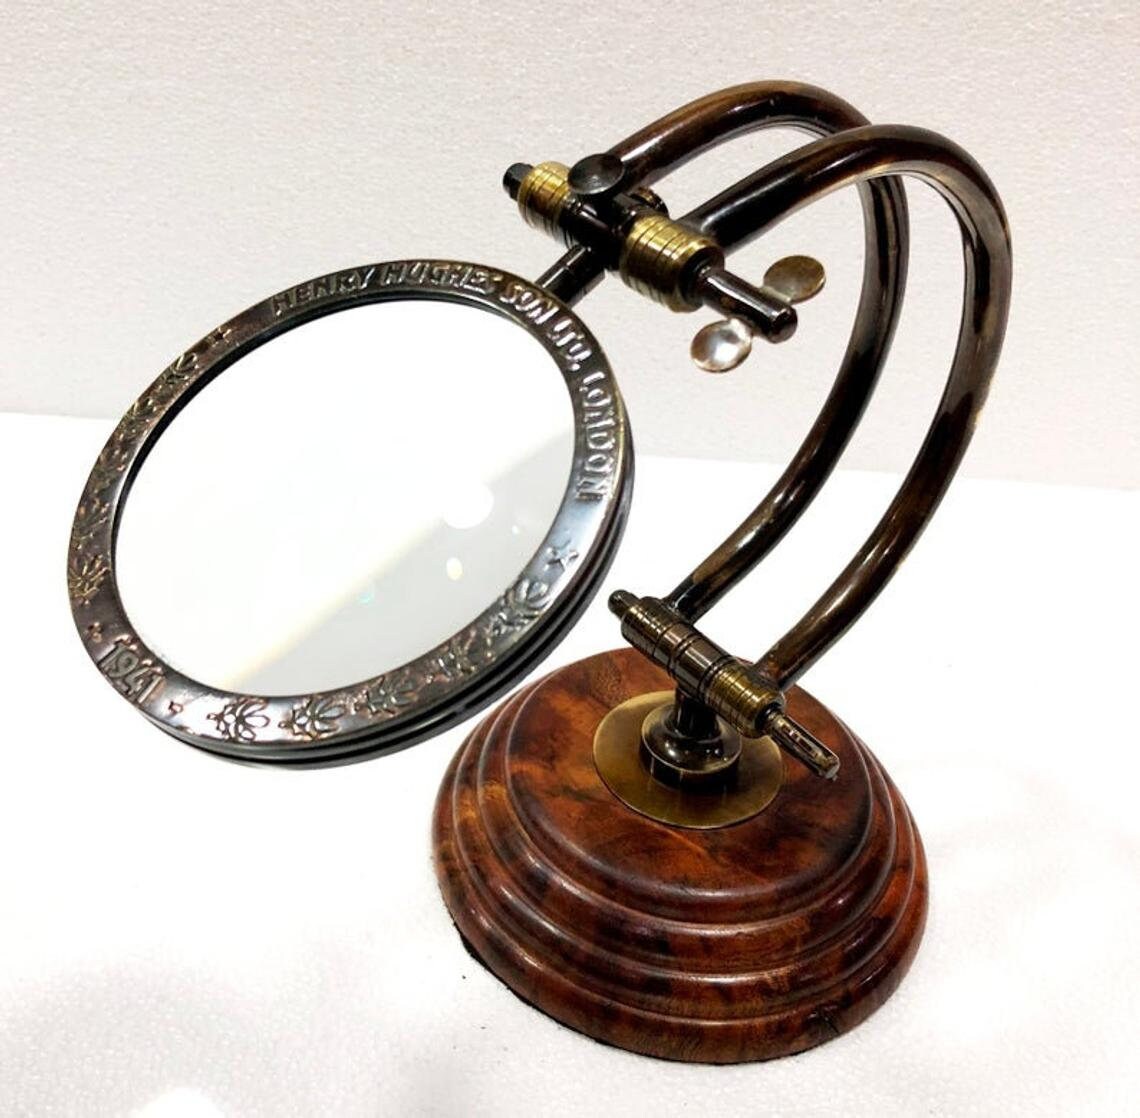 Magnifying Glass Brass Antique Vintage Style Table Decor Paper Weight Free Ship 